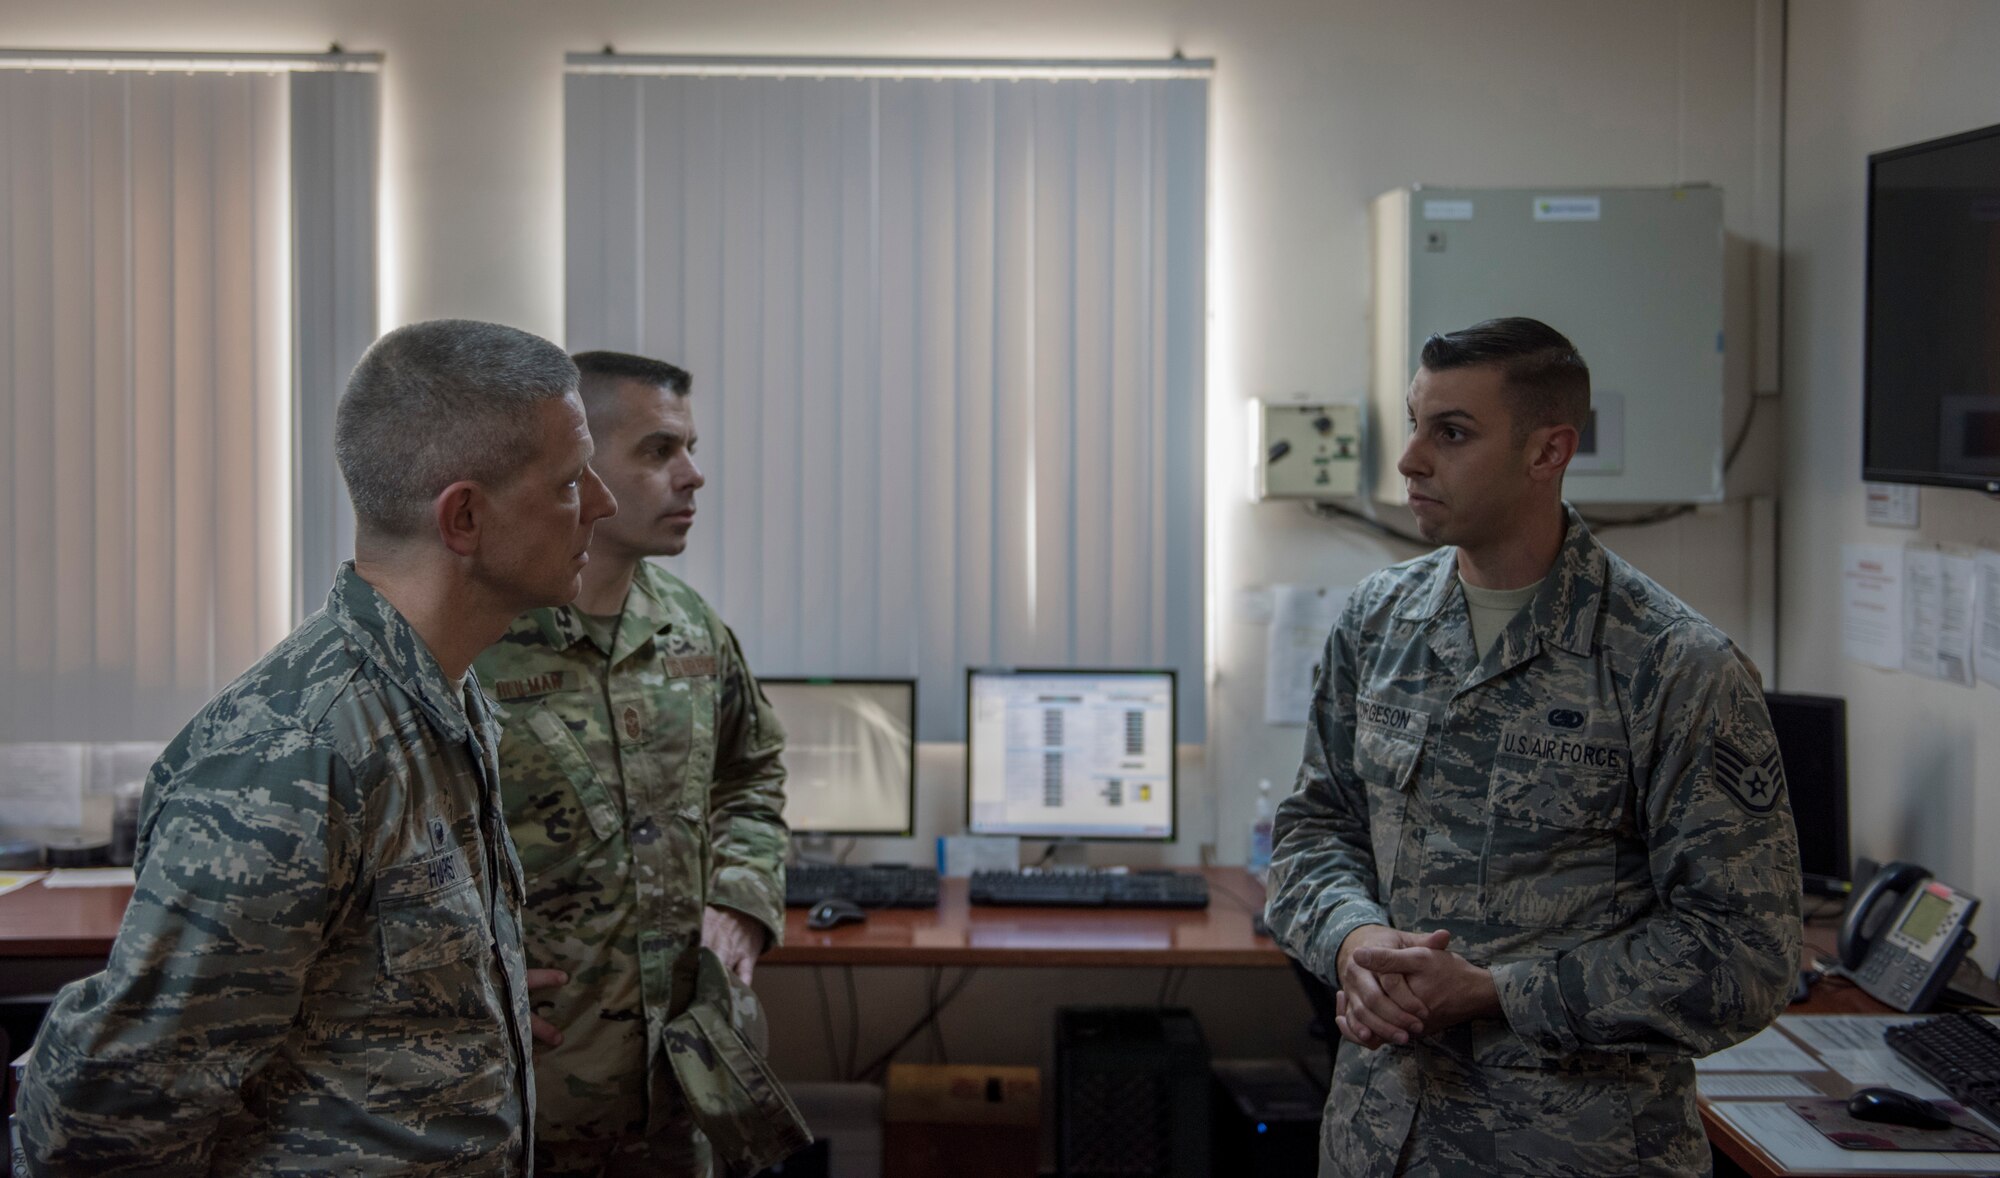 A 39th Logistics Readiness Squadron fuels service center controller briefs the 39th Air Base Wing commander and command chief.